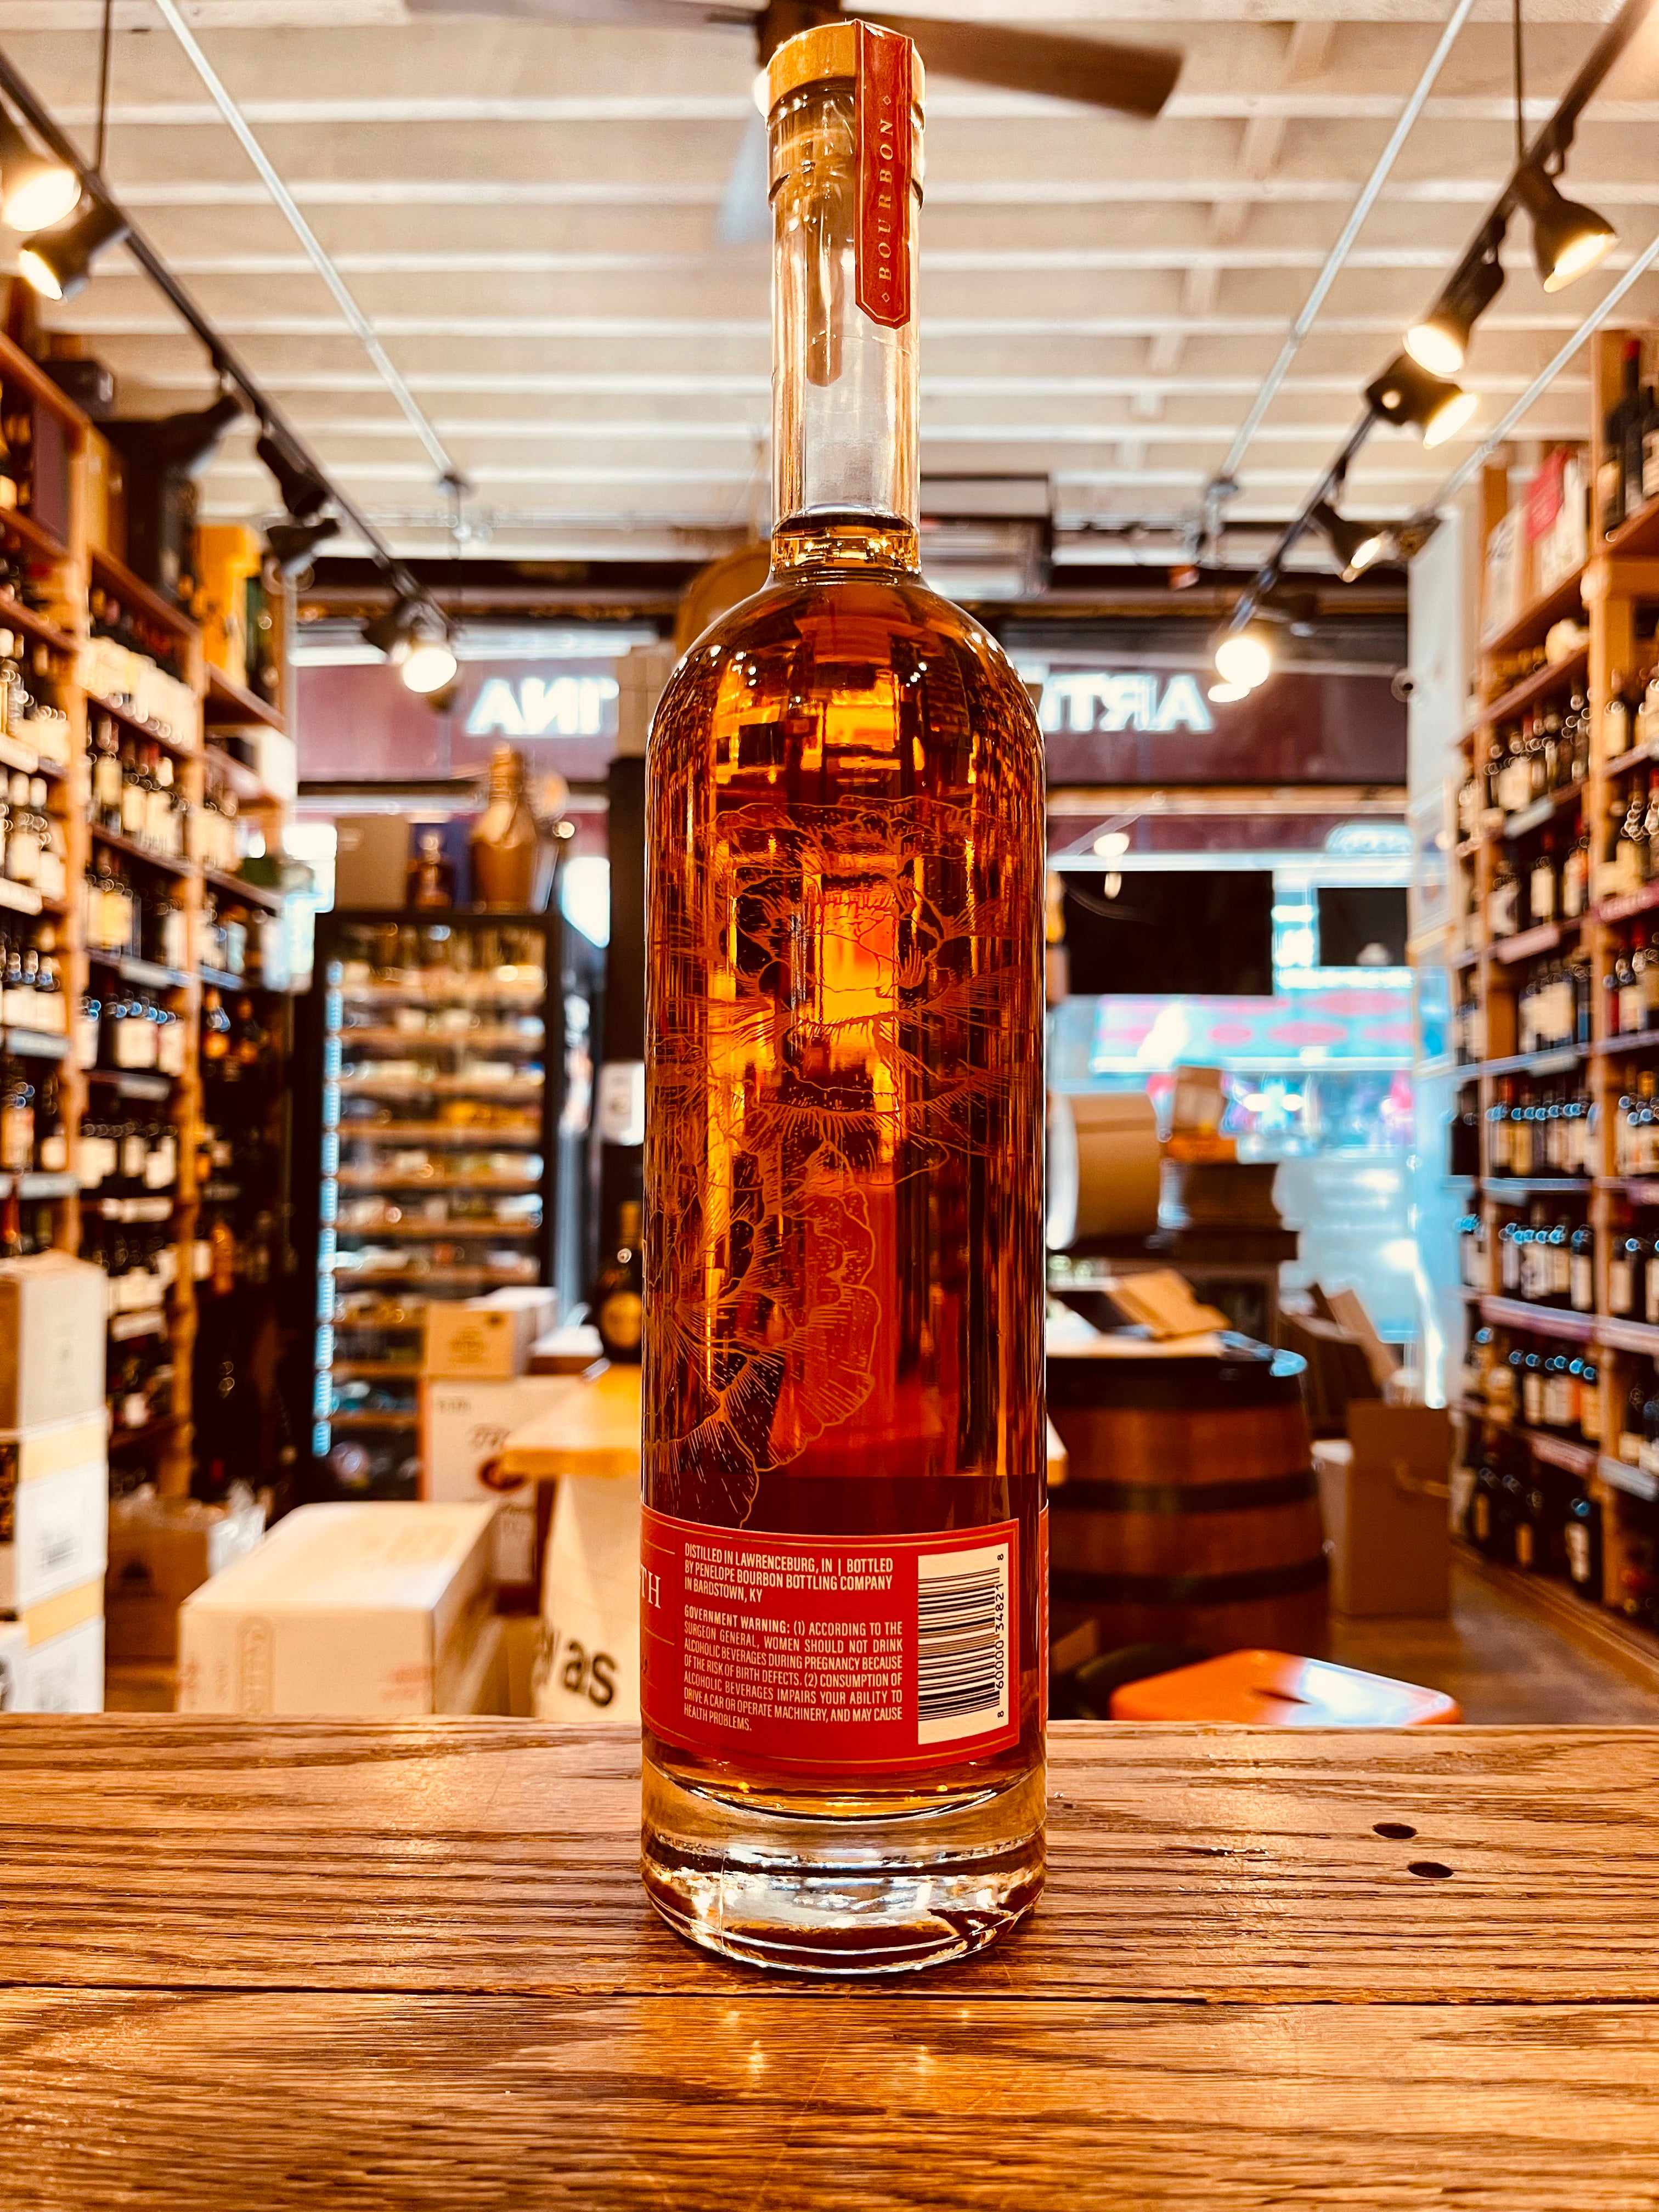 Penelope Bourbon Barrel Strength 750mL the backside of a tall clear glass bottle with a slender long neck with red label and an image of a rose etched onto the bottle